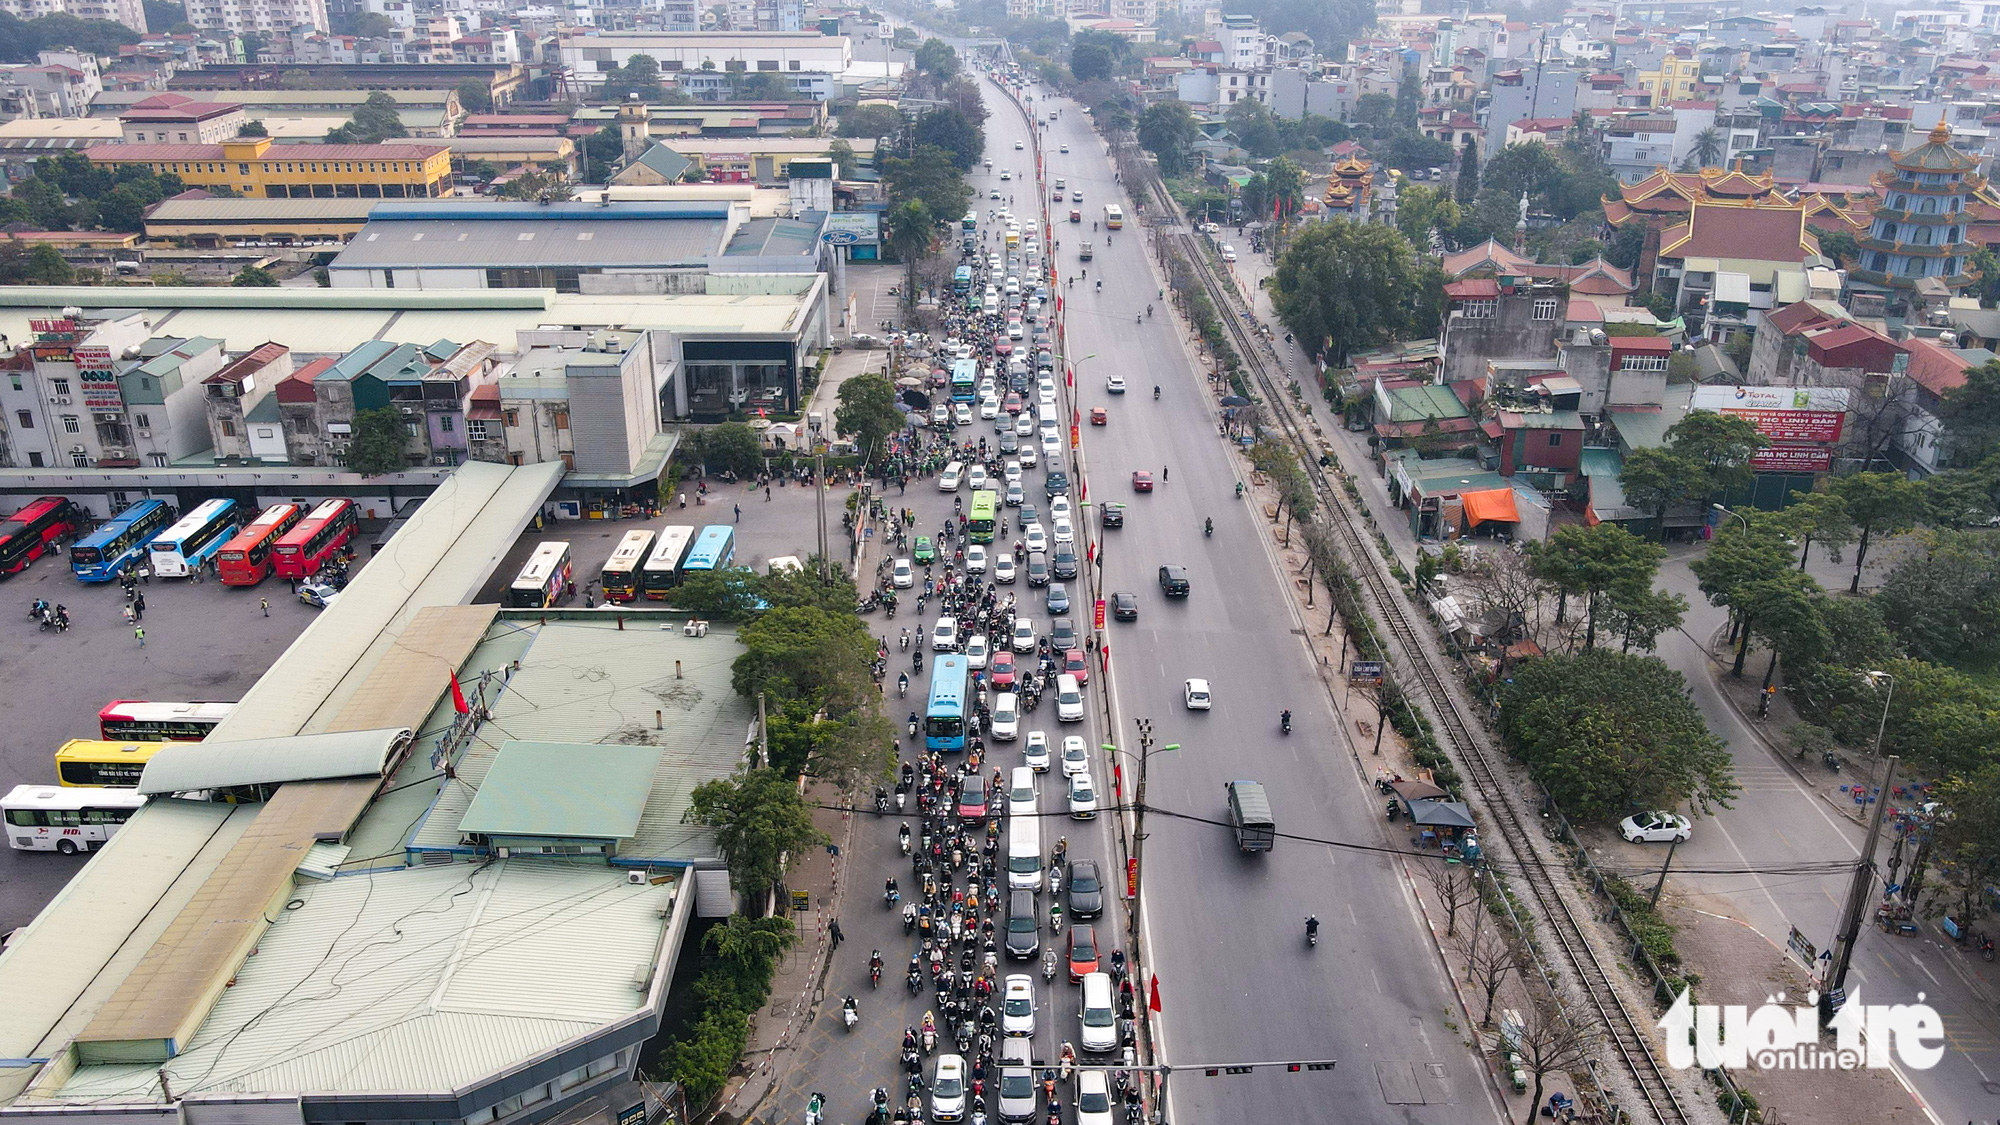 Vehicles wait for a red light on Ngoc Hoi Street near Nuoc Ngam Bus Station in Hoang Mai District, Hanoi, January 26, 2023. Photo: Van Cong / Tuoi Tre